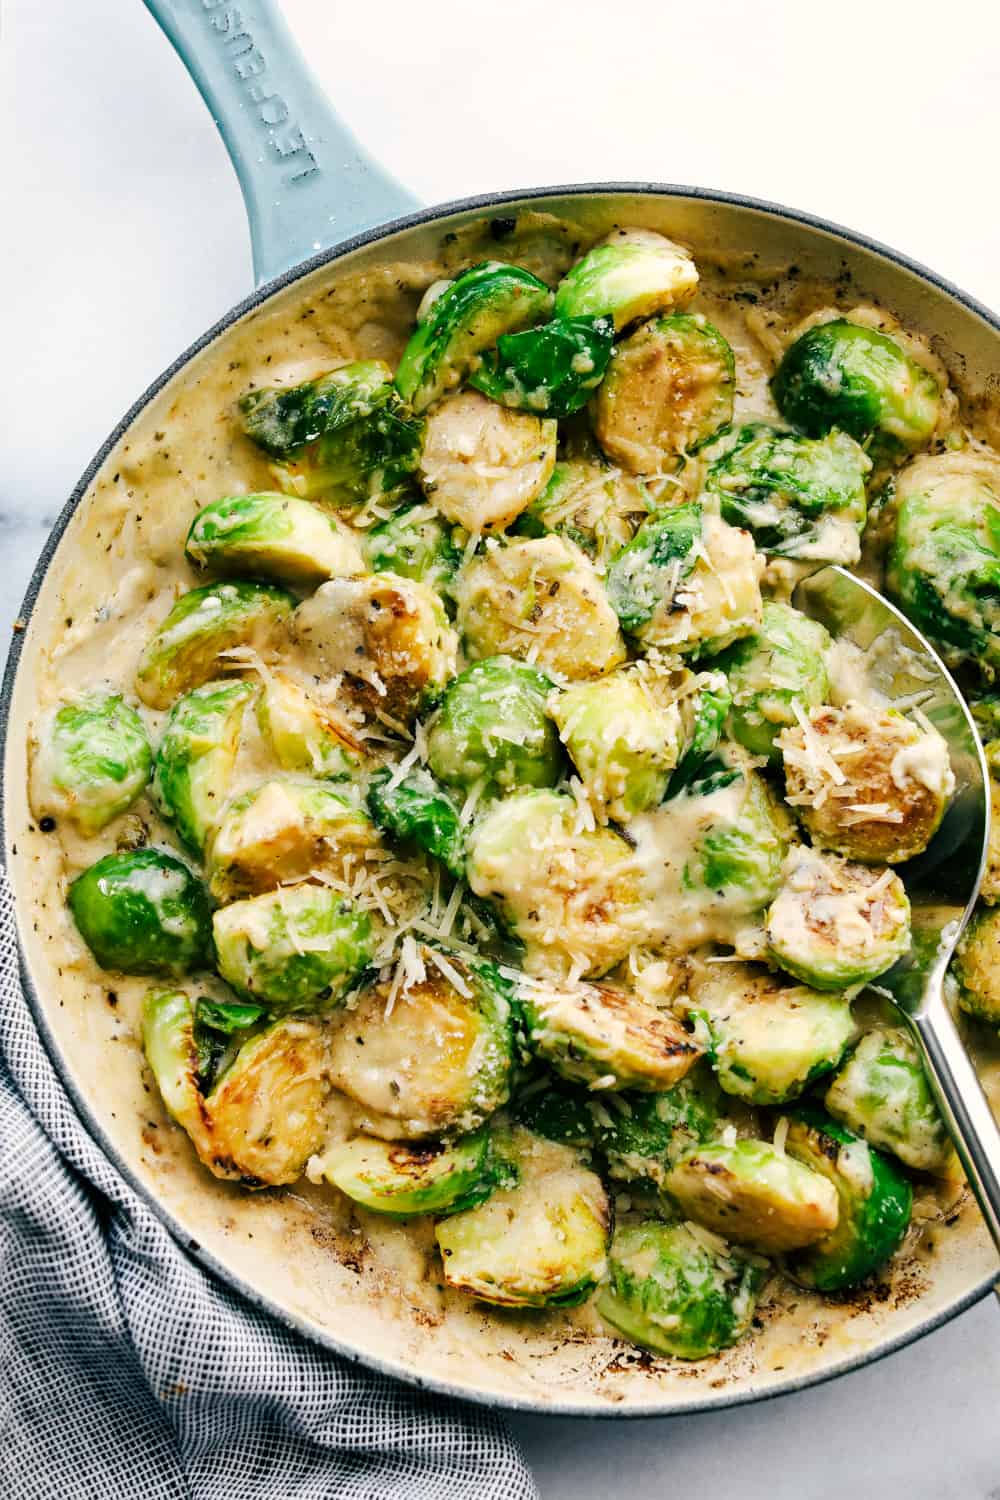 Top view of creamy parmesan garlic Brussels sprouts in a skillet with a silver serving spoon.